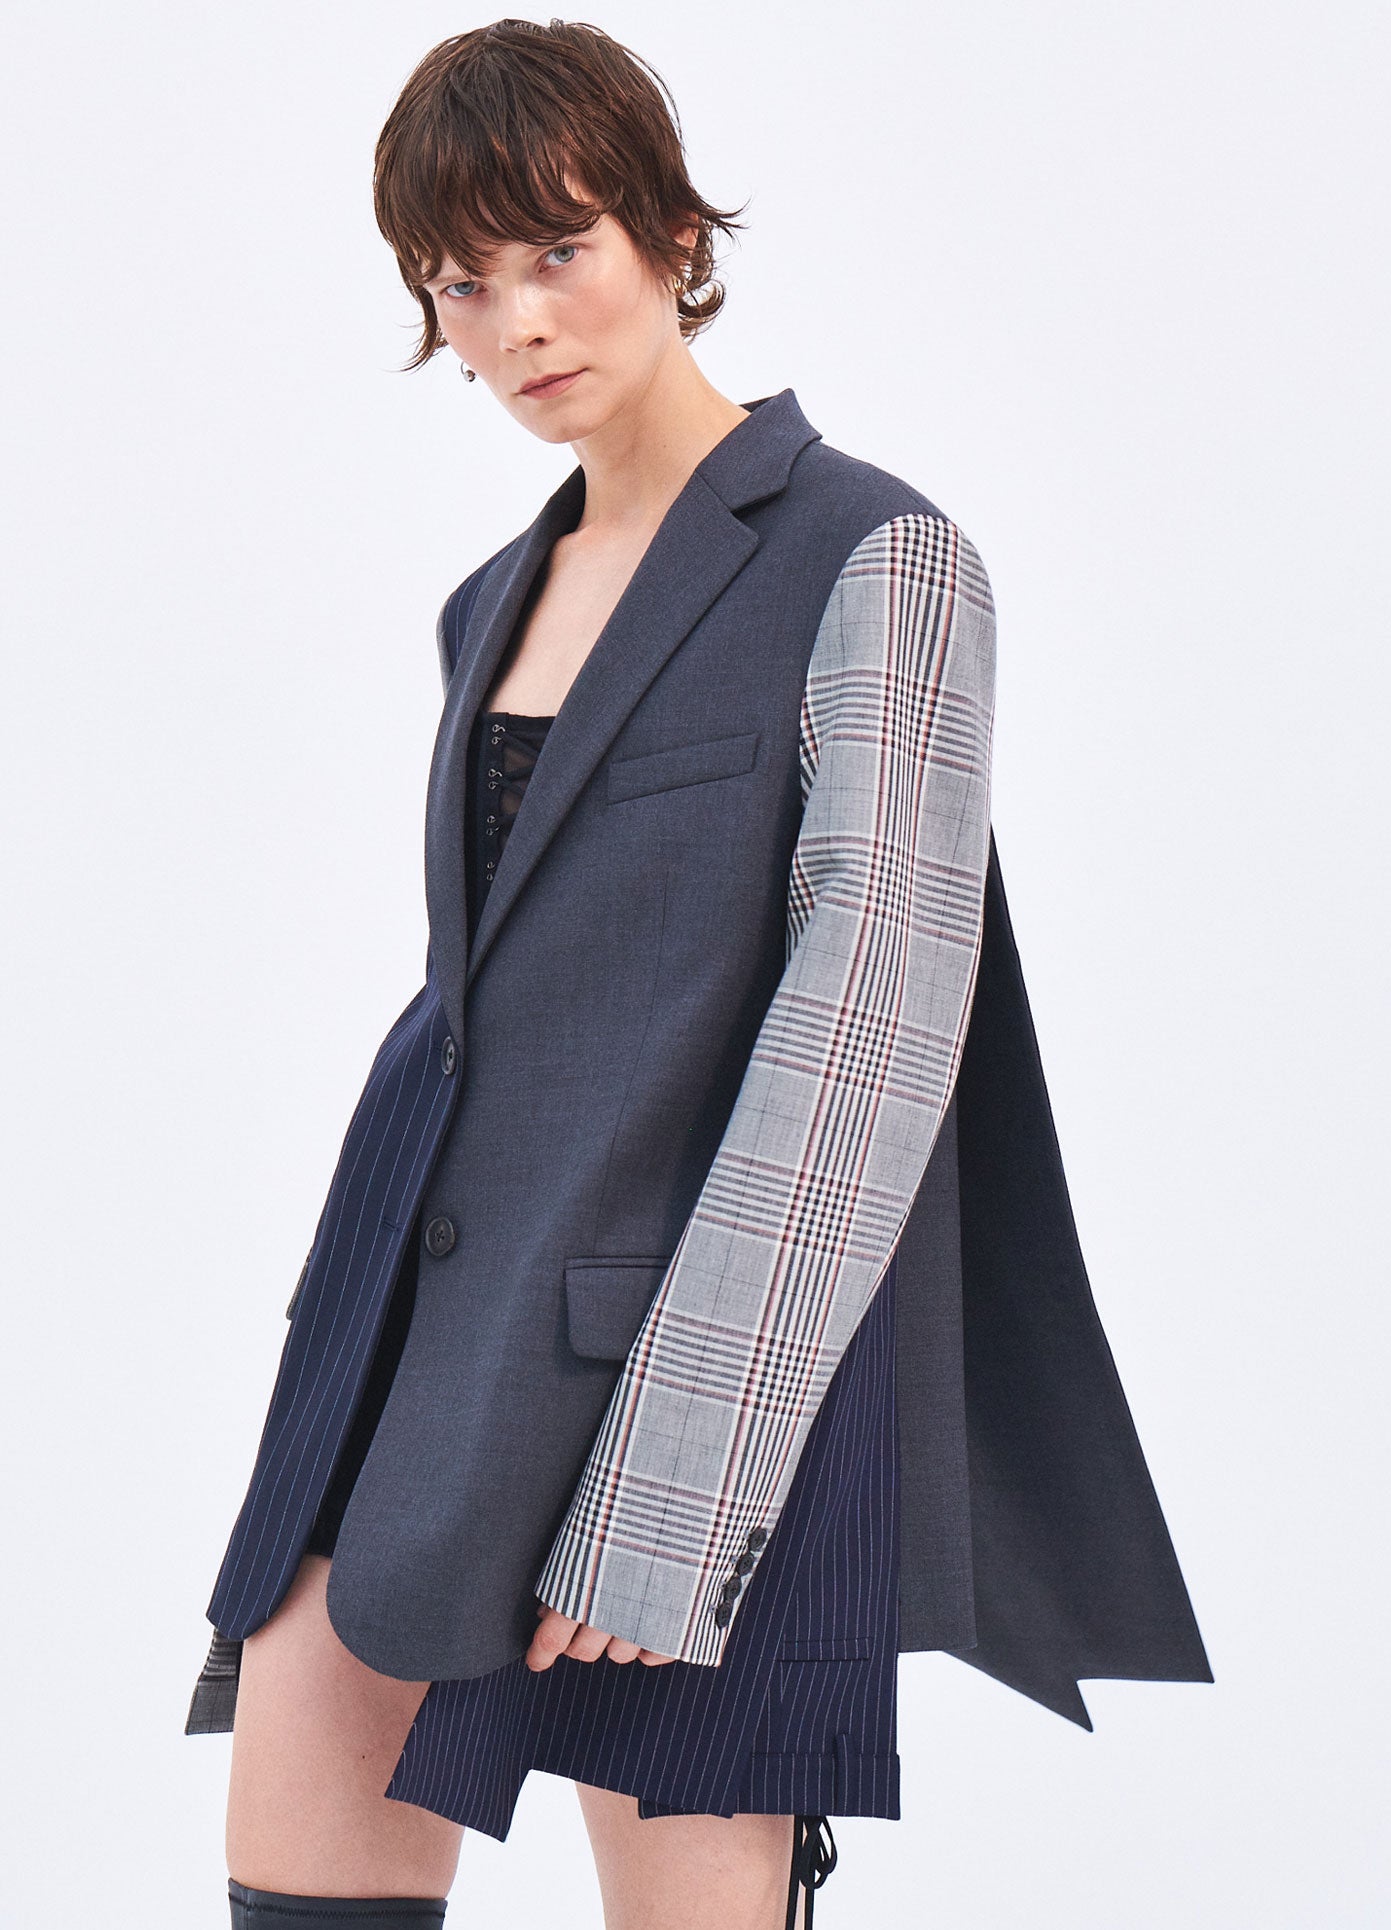 MONSE Spring 2024 Combo Boxy Tailored Jacket in Charcoal on model front side view